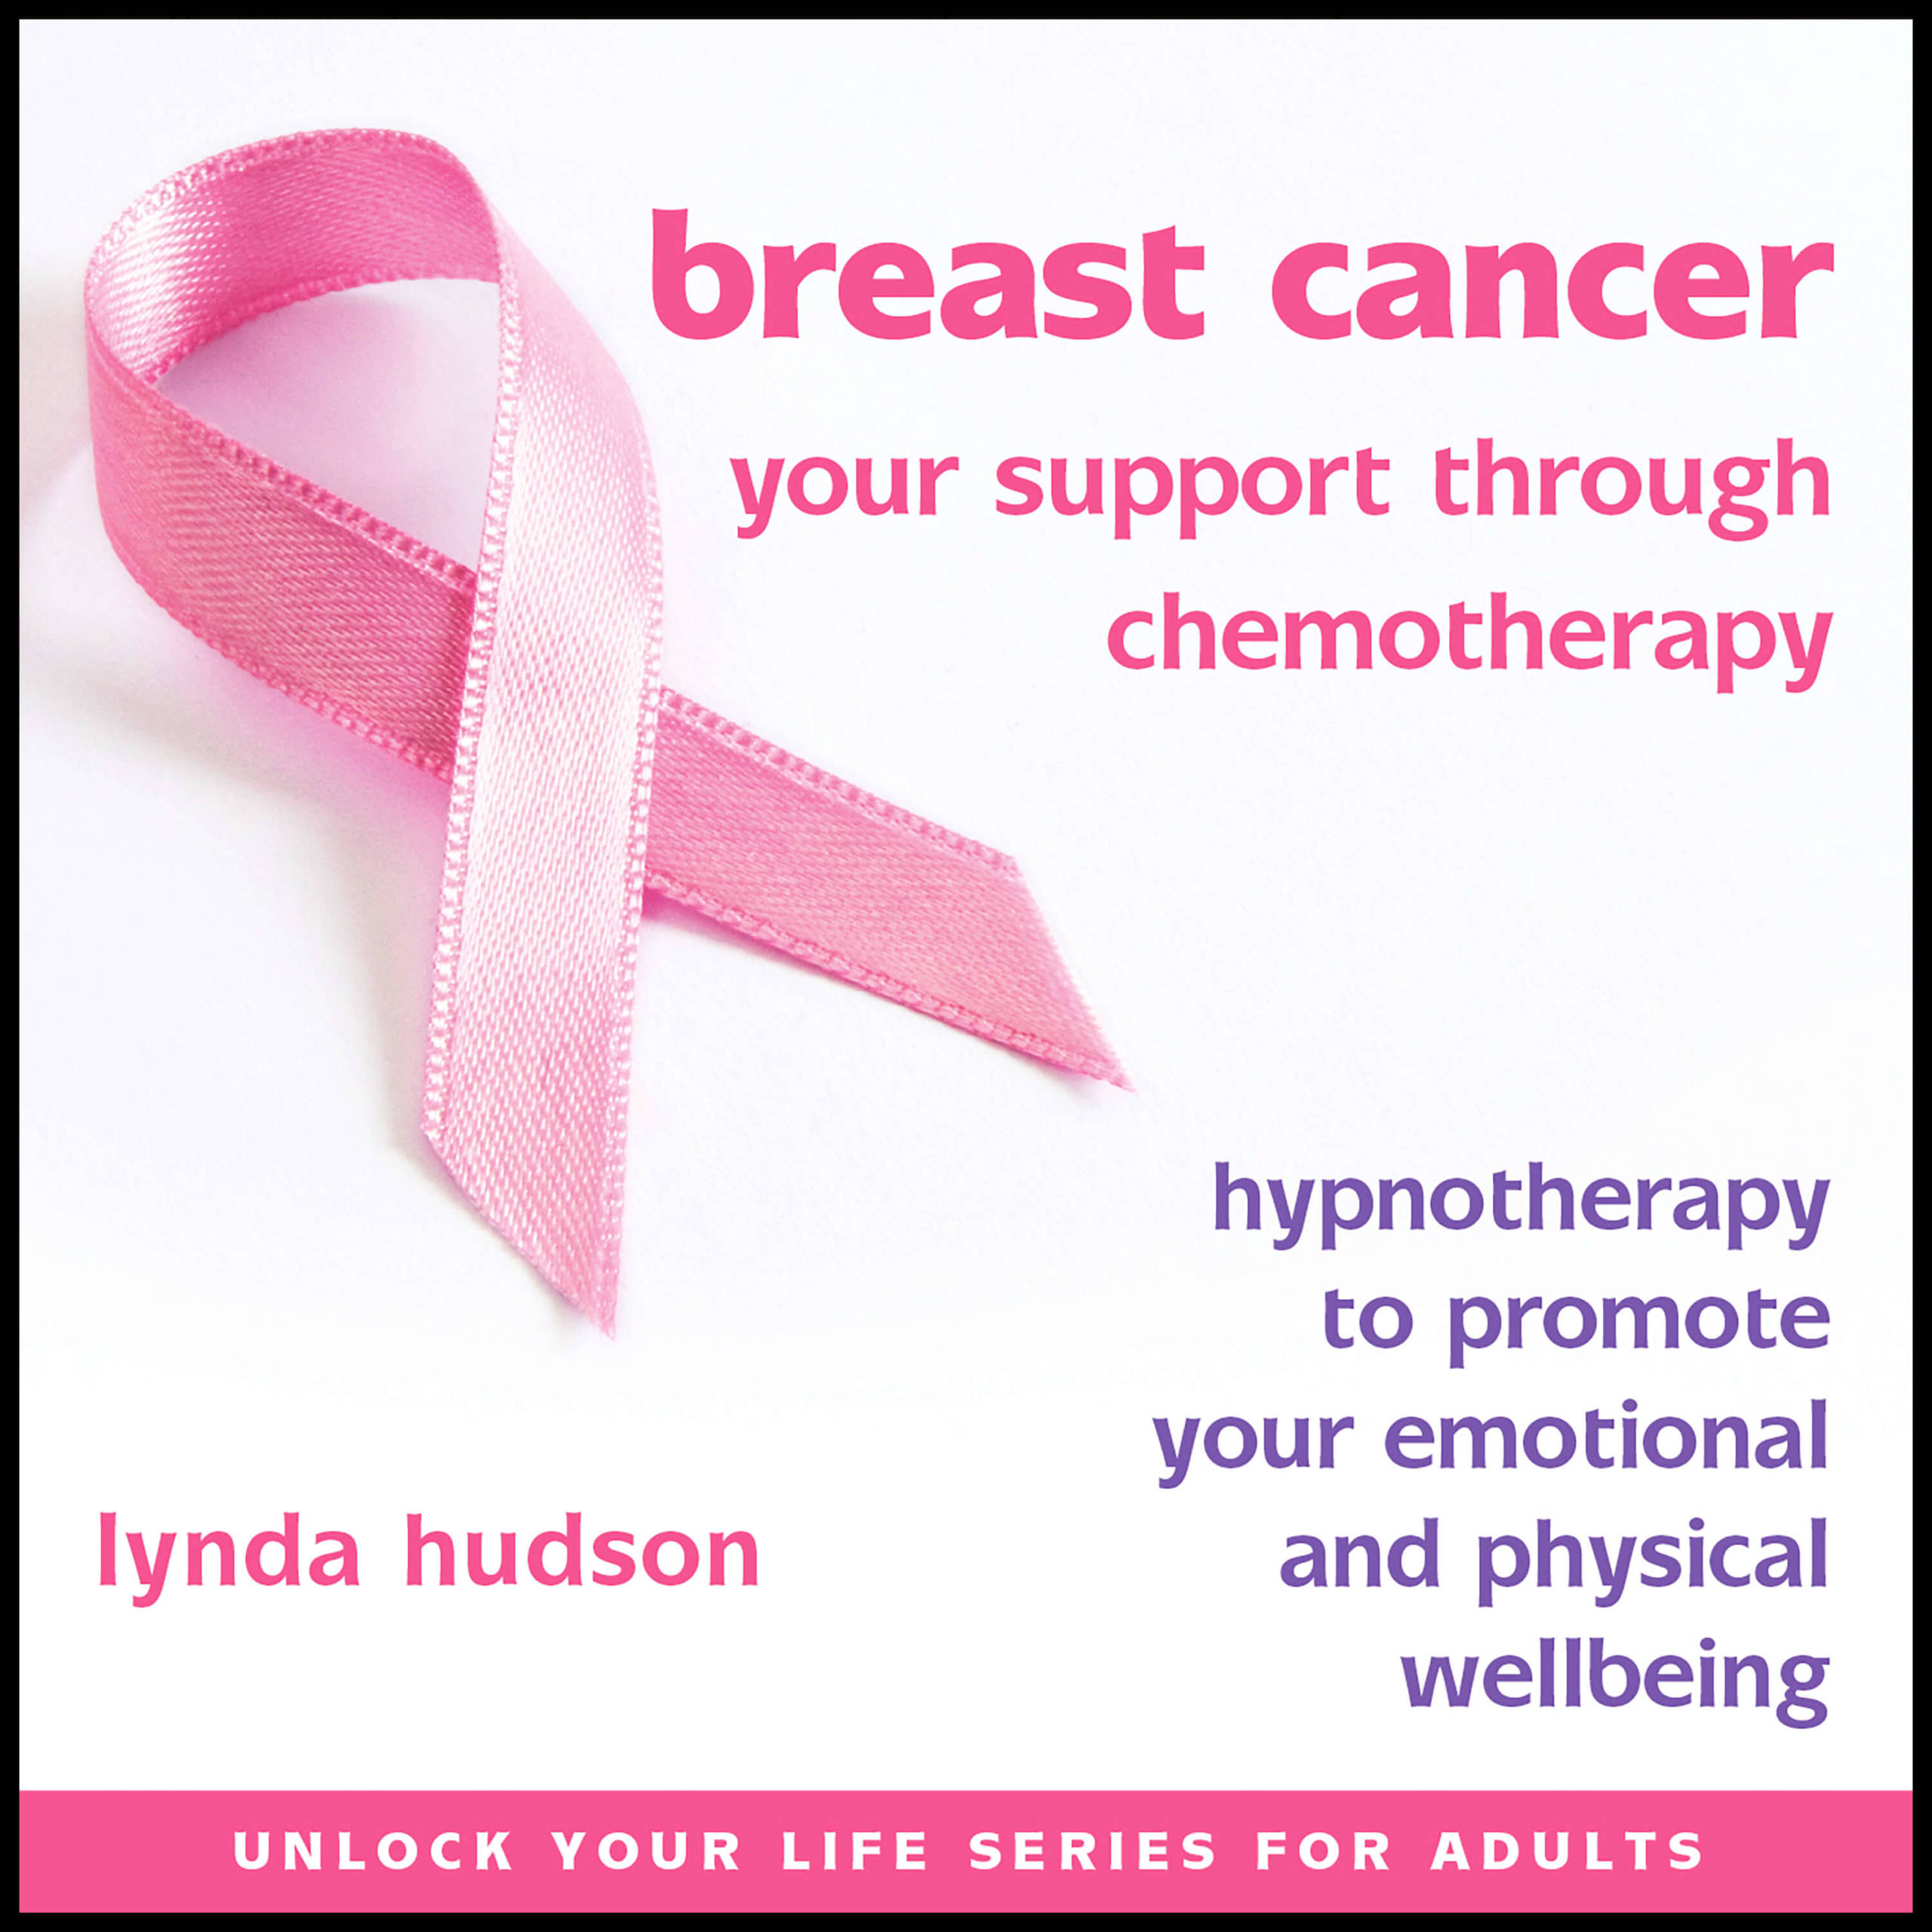 Breast cancer … your support through chemotherapy